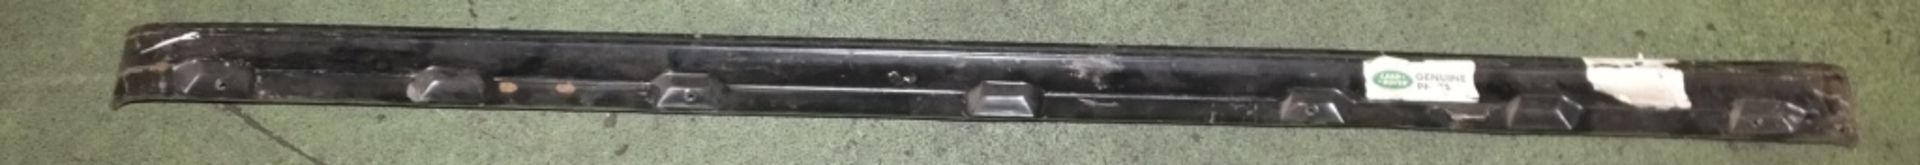 Land Rover skirting section / panel